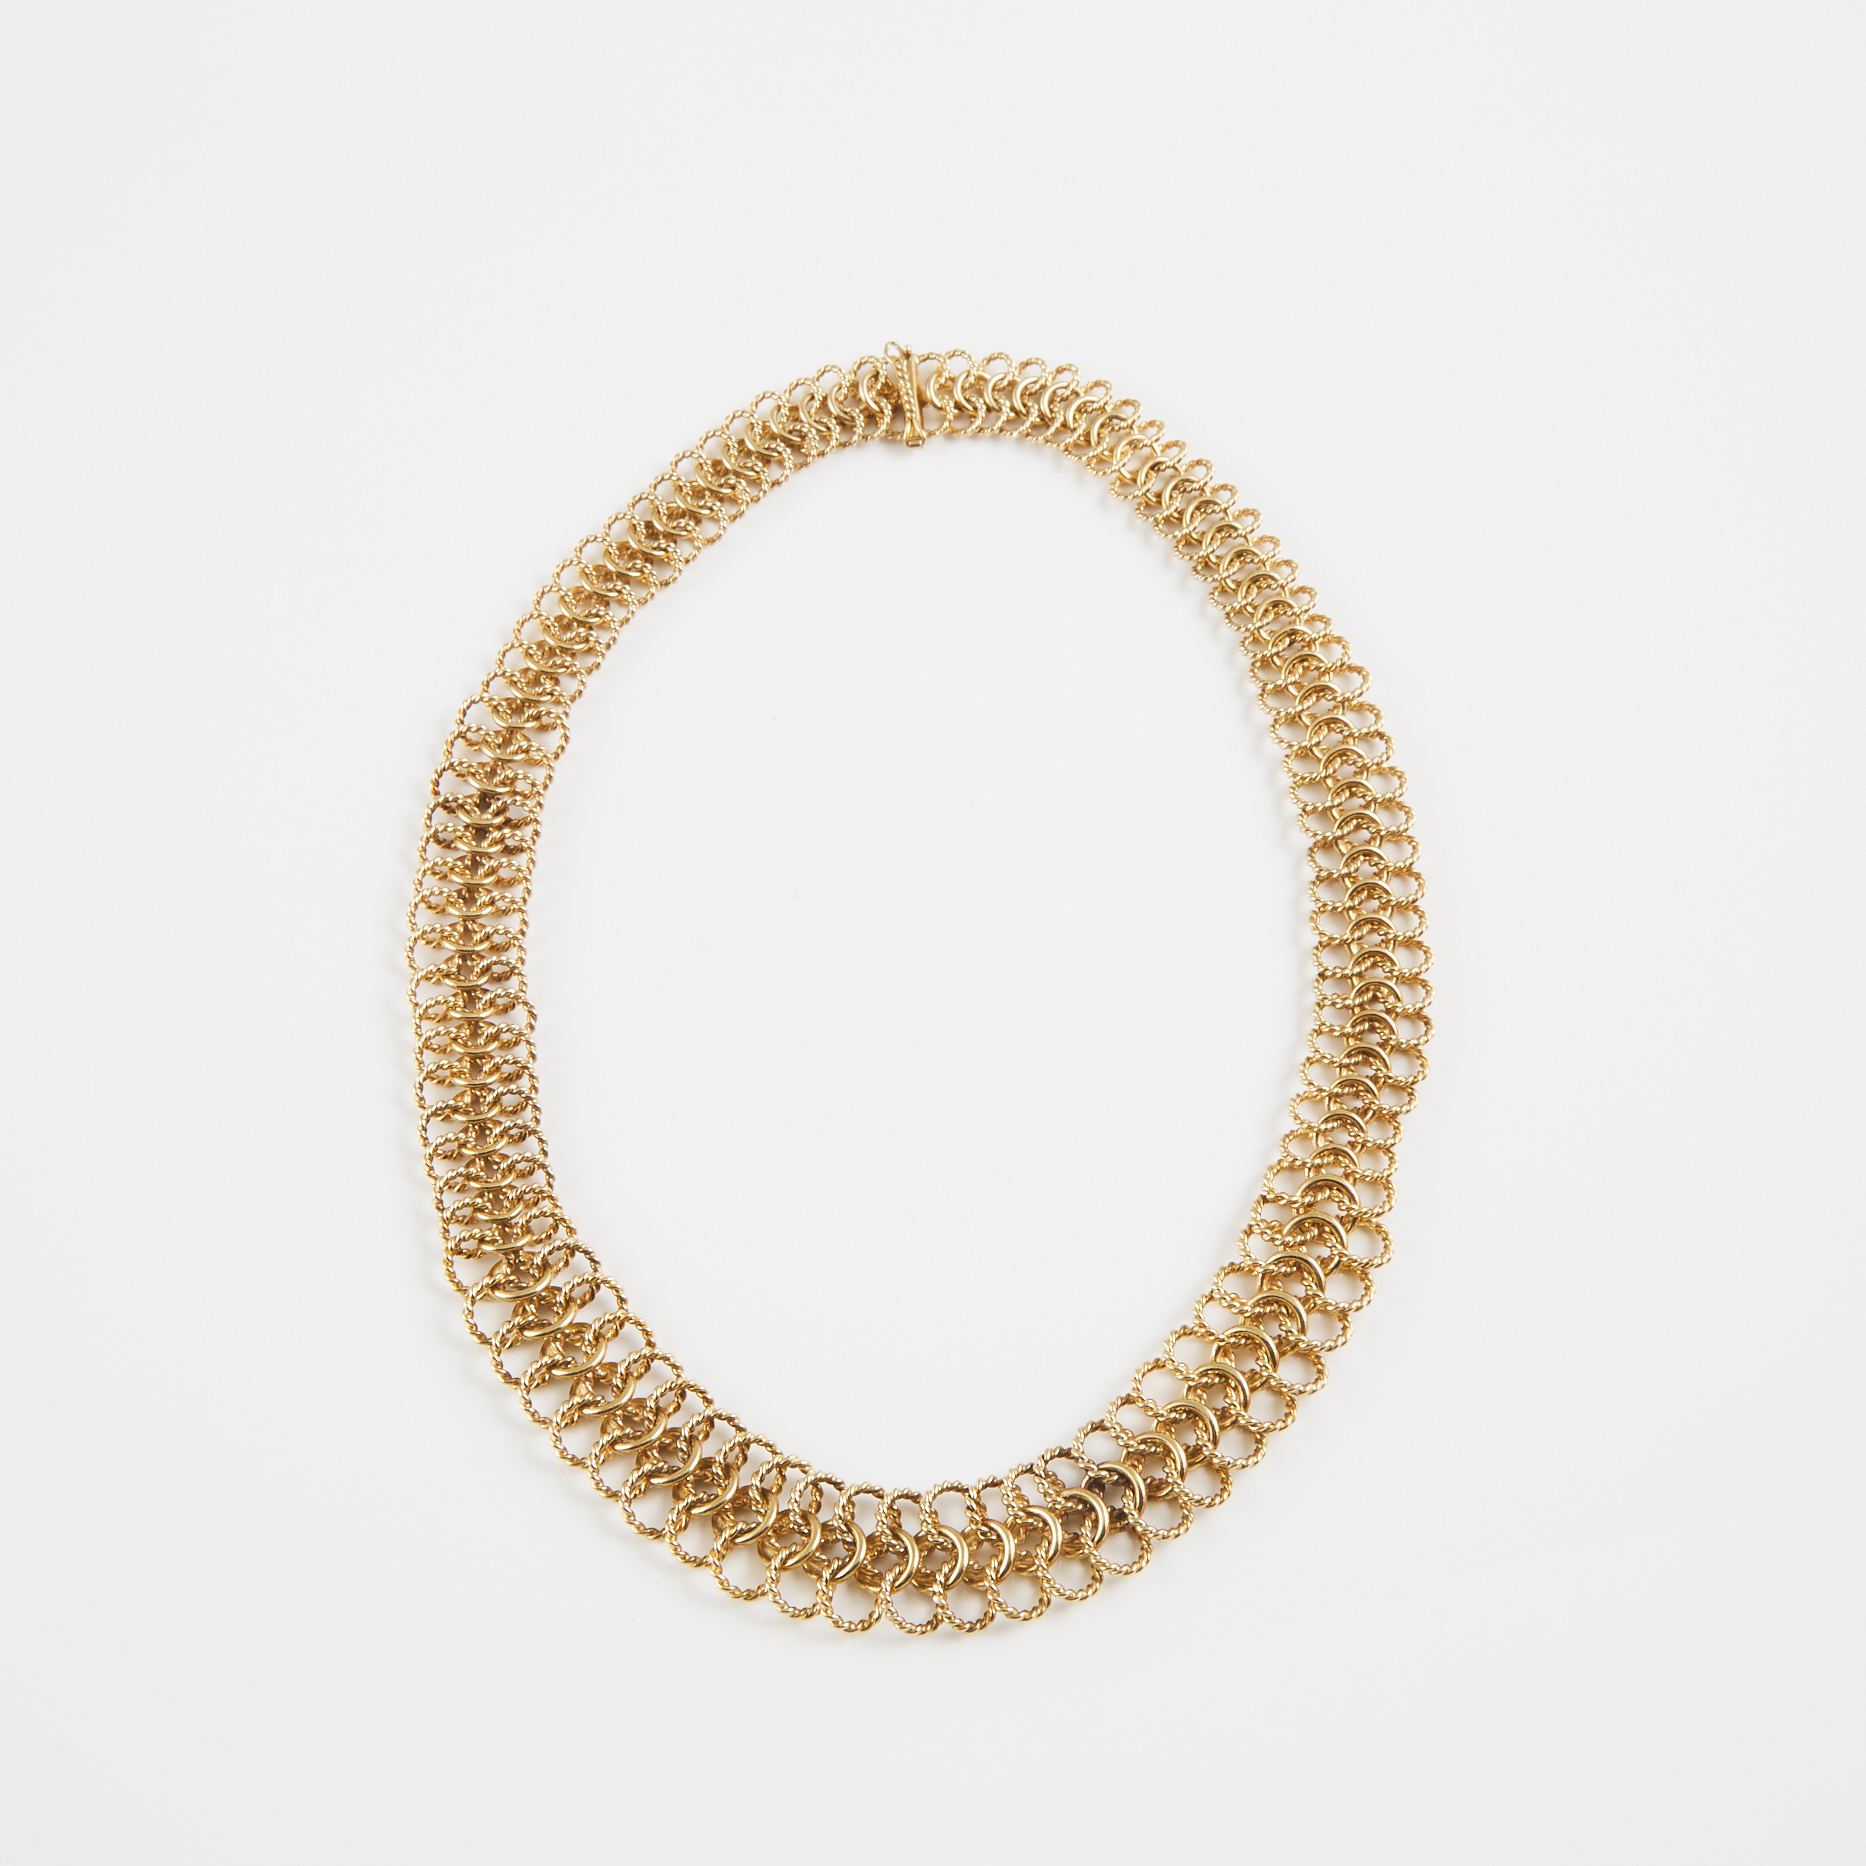 10k Yellow Gold Graduated Twisted Link Necklace